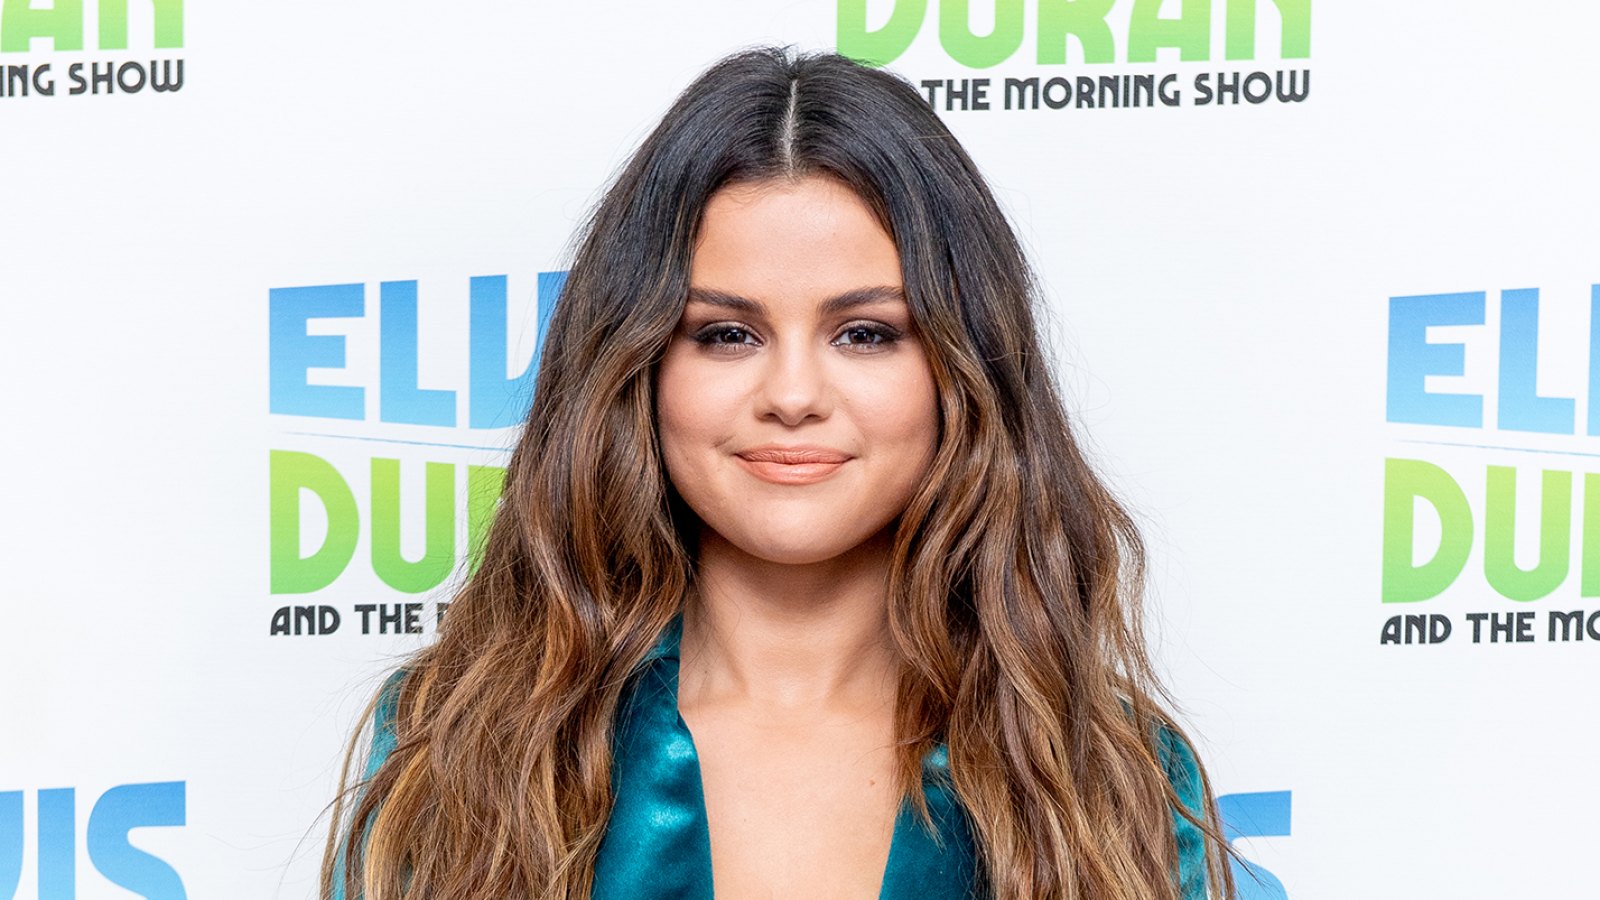 Selena Gomez Proves Blondes Have More Fun, Shows Off Her Newly Lightened Locks in Glam Selfie